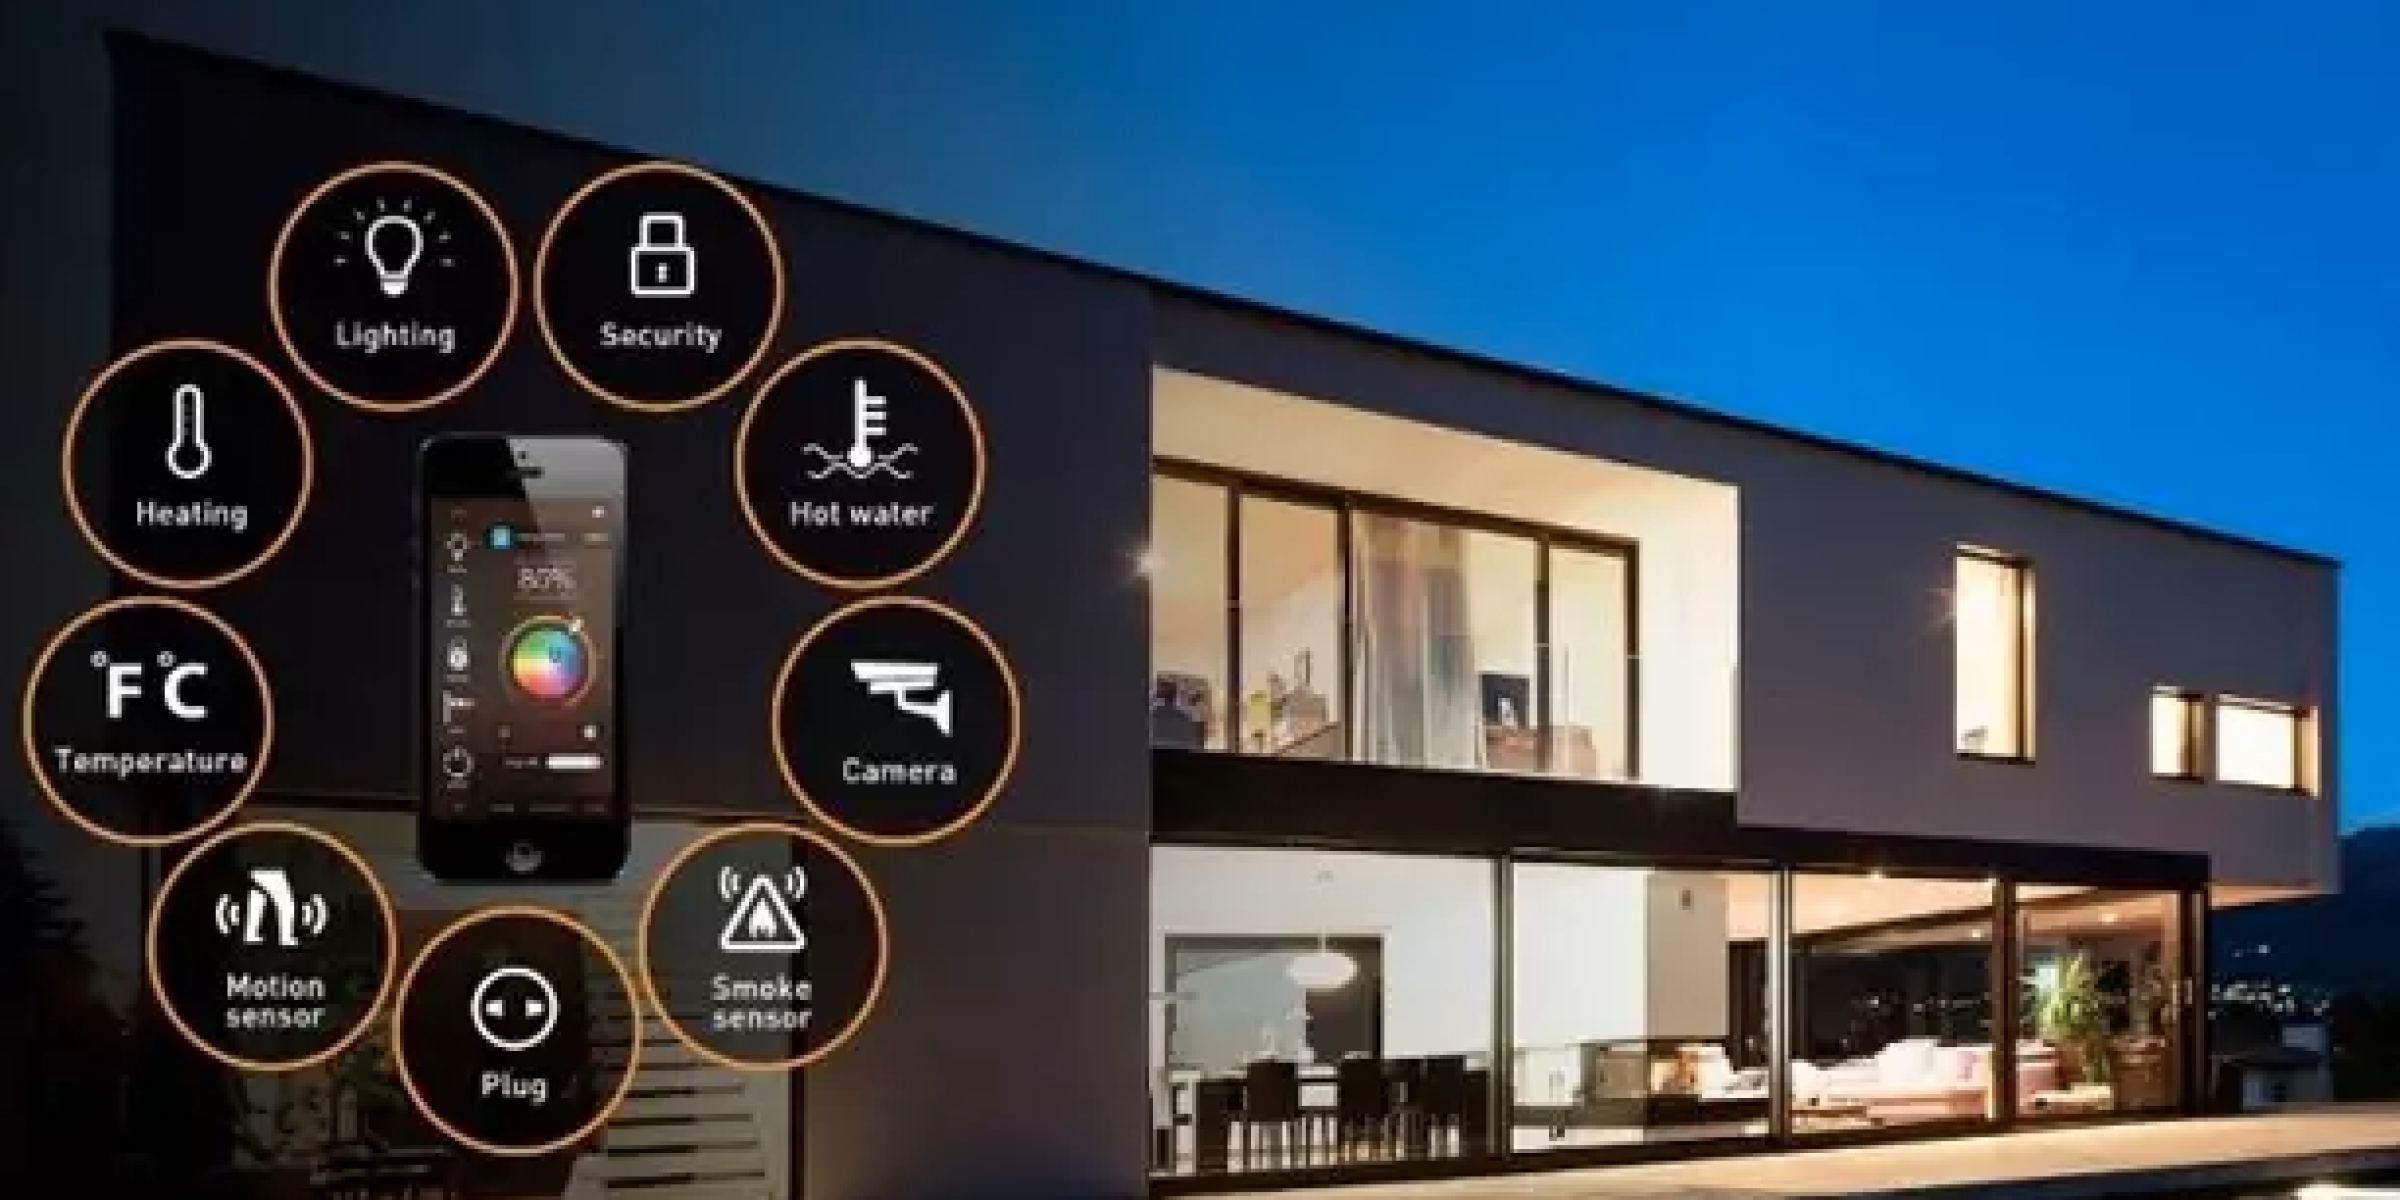 Make your life easier with smart home gadgets